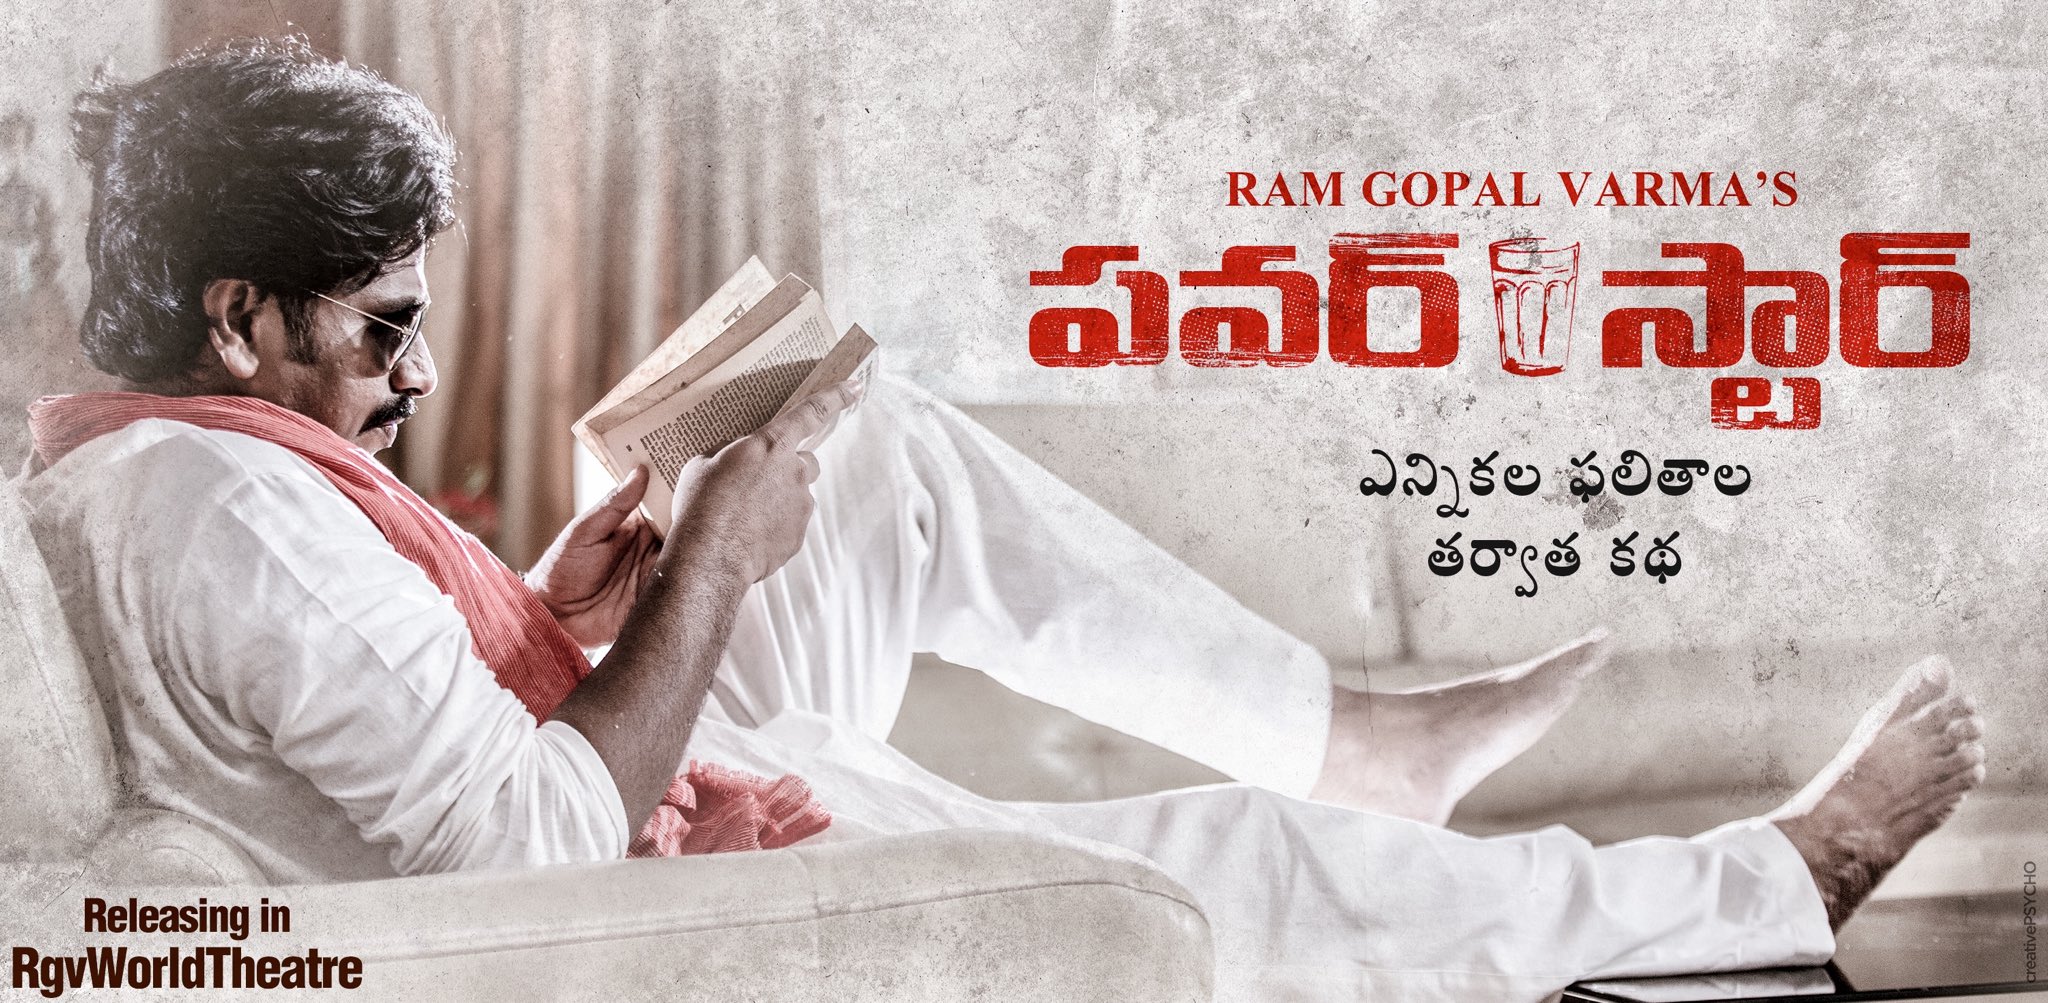 Why you must watch the movie ‘Power Star’ made by Ram Gopal Varma